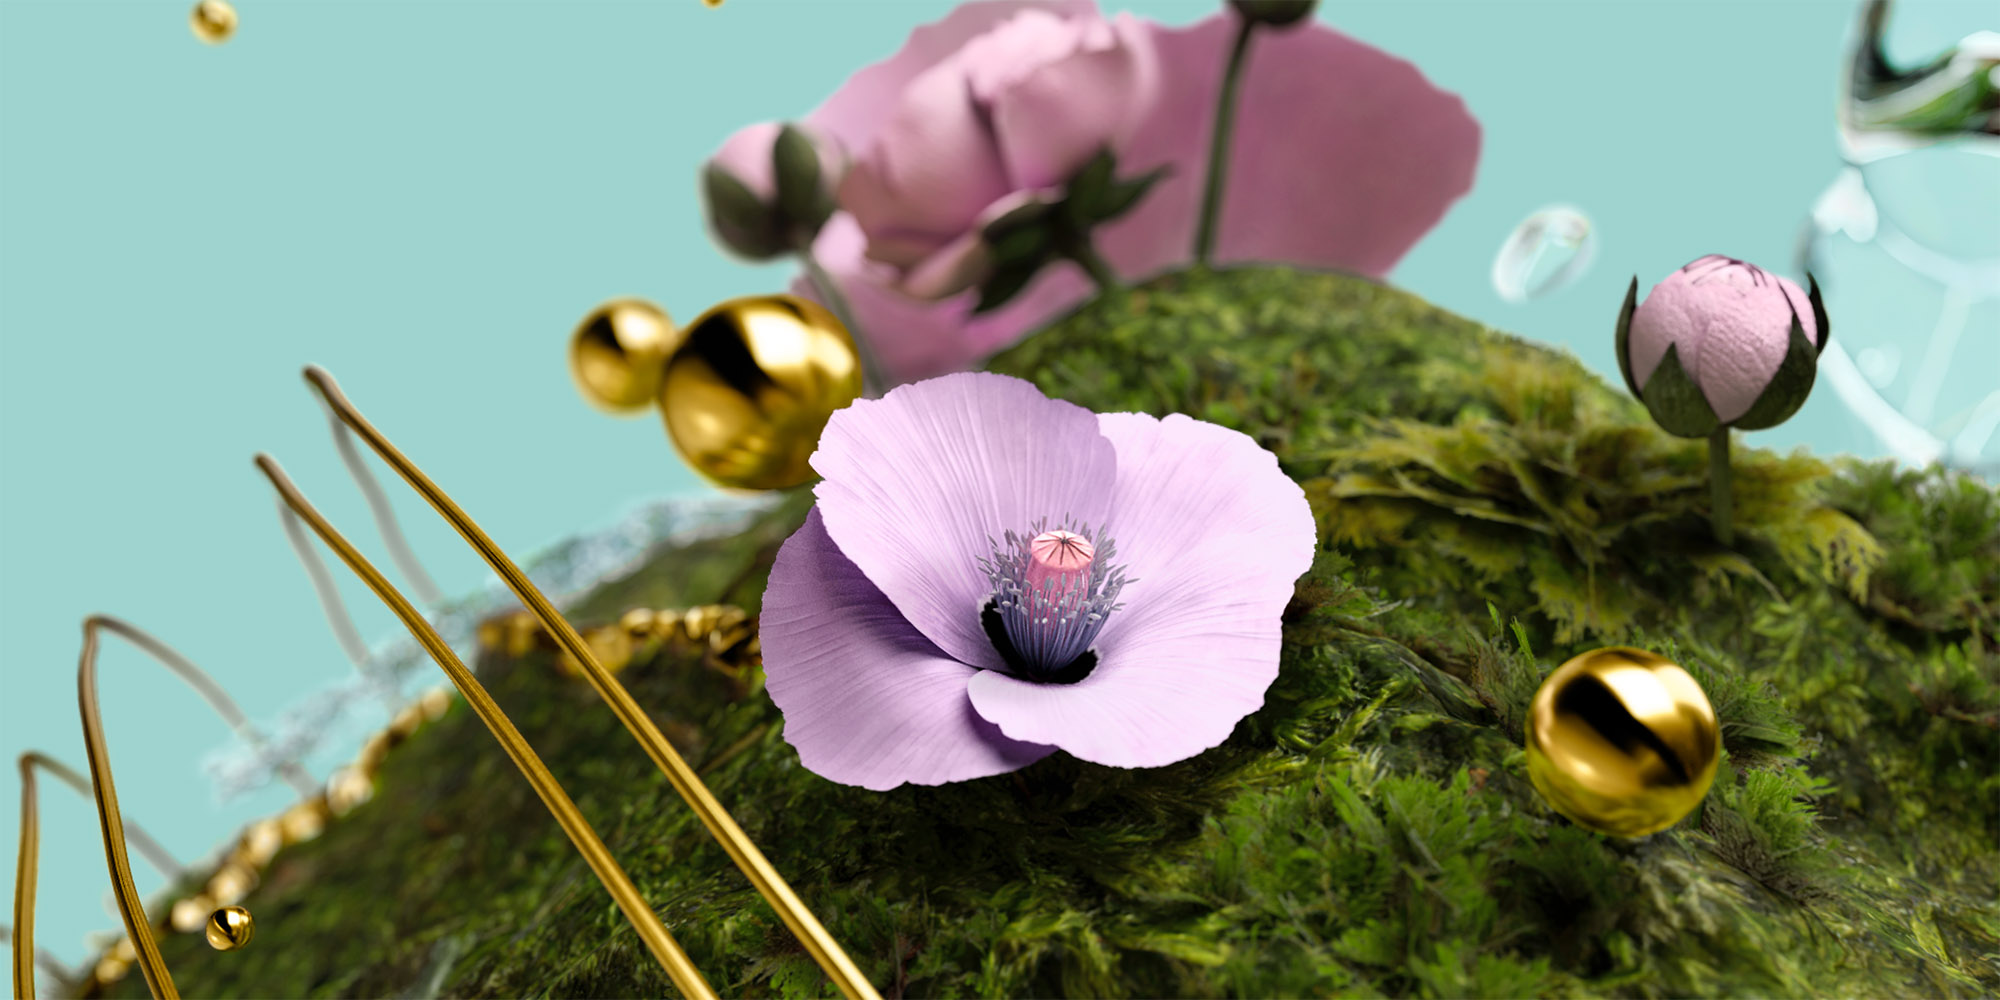 A purplish-pink poppy flower with water droplets resting on its petals, surrounded by floating gold spheres on a bed of moss.